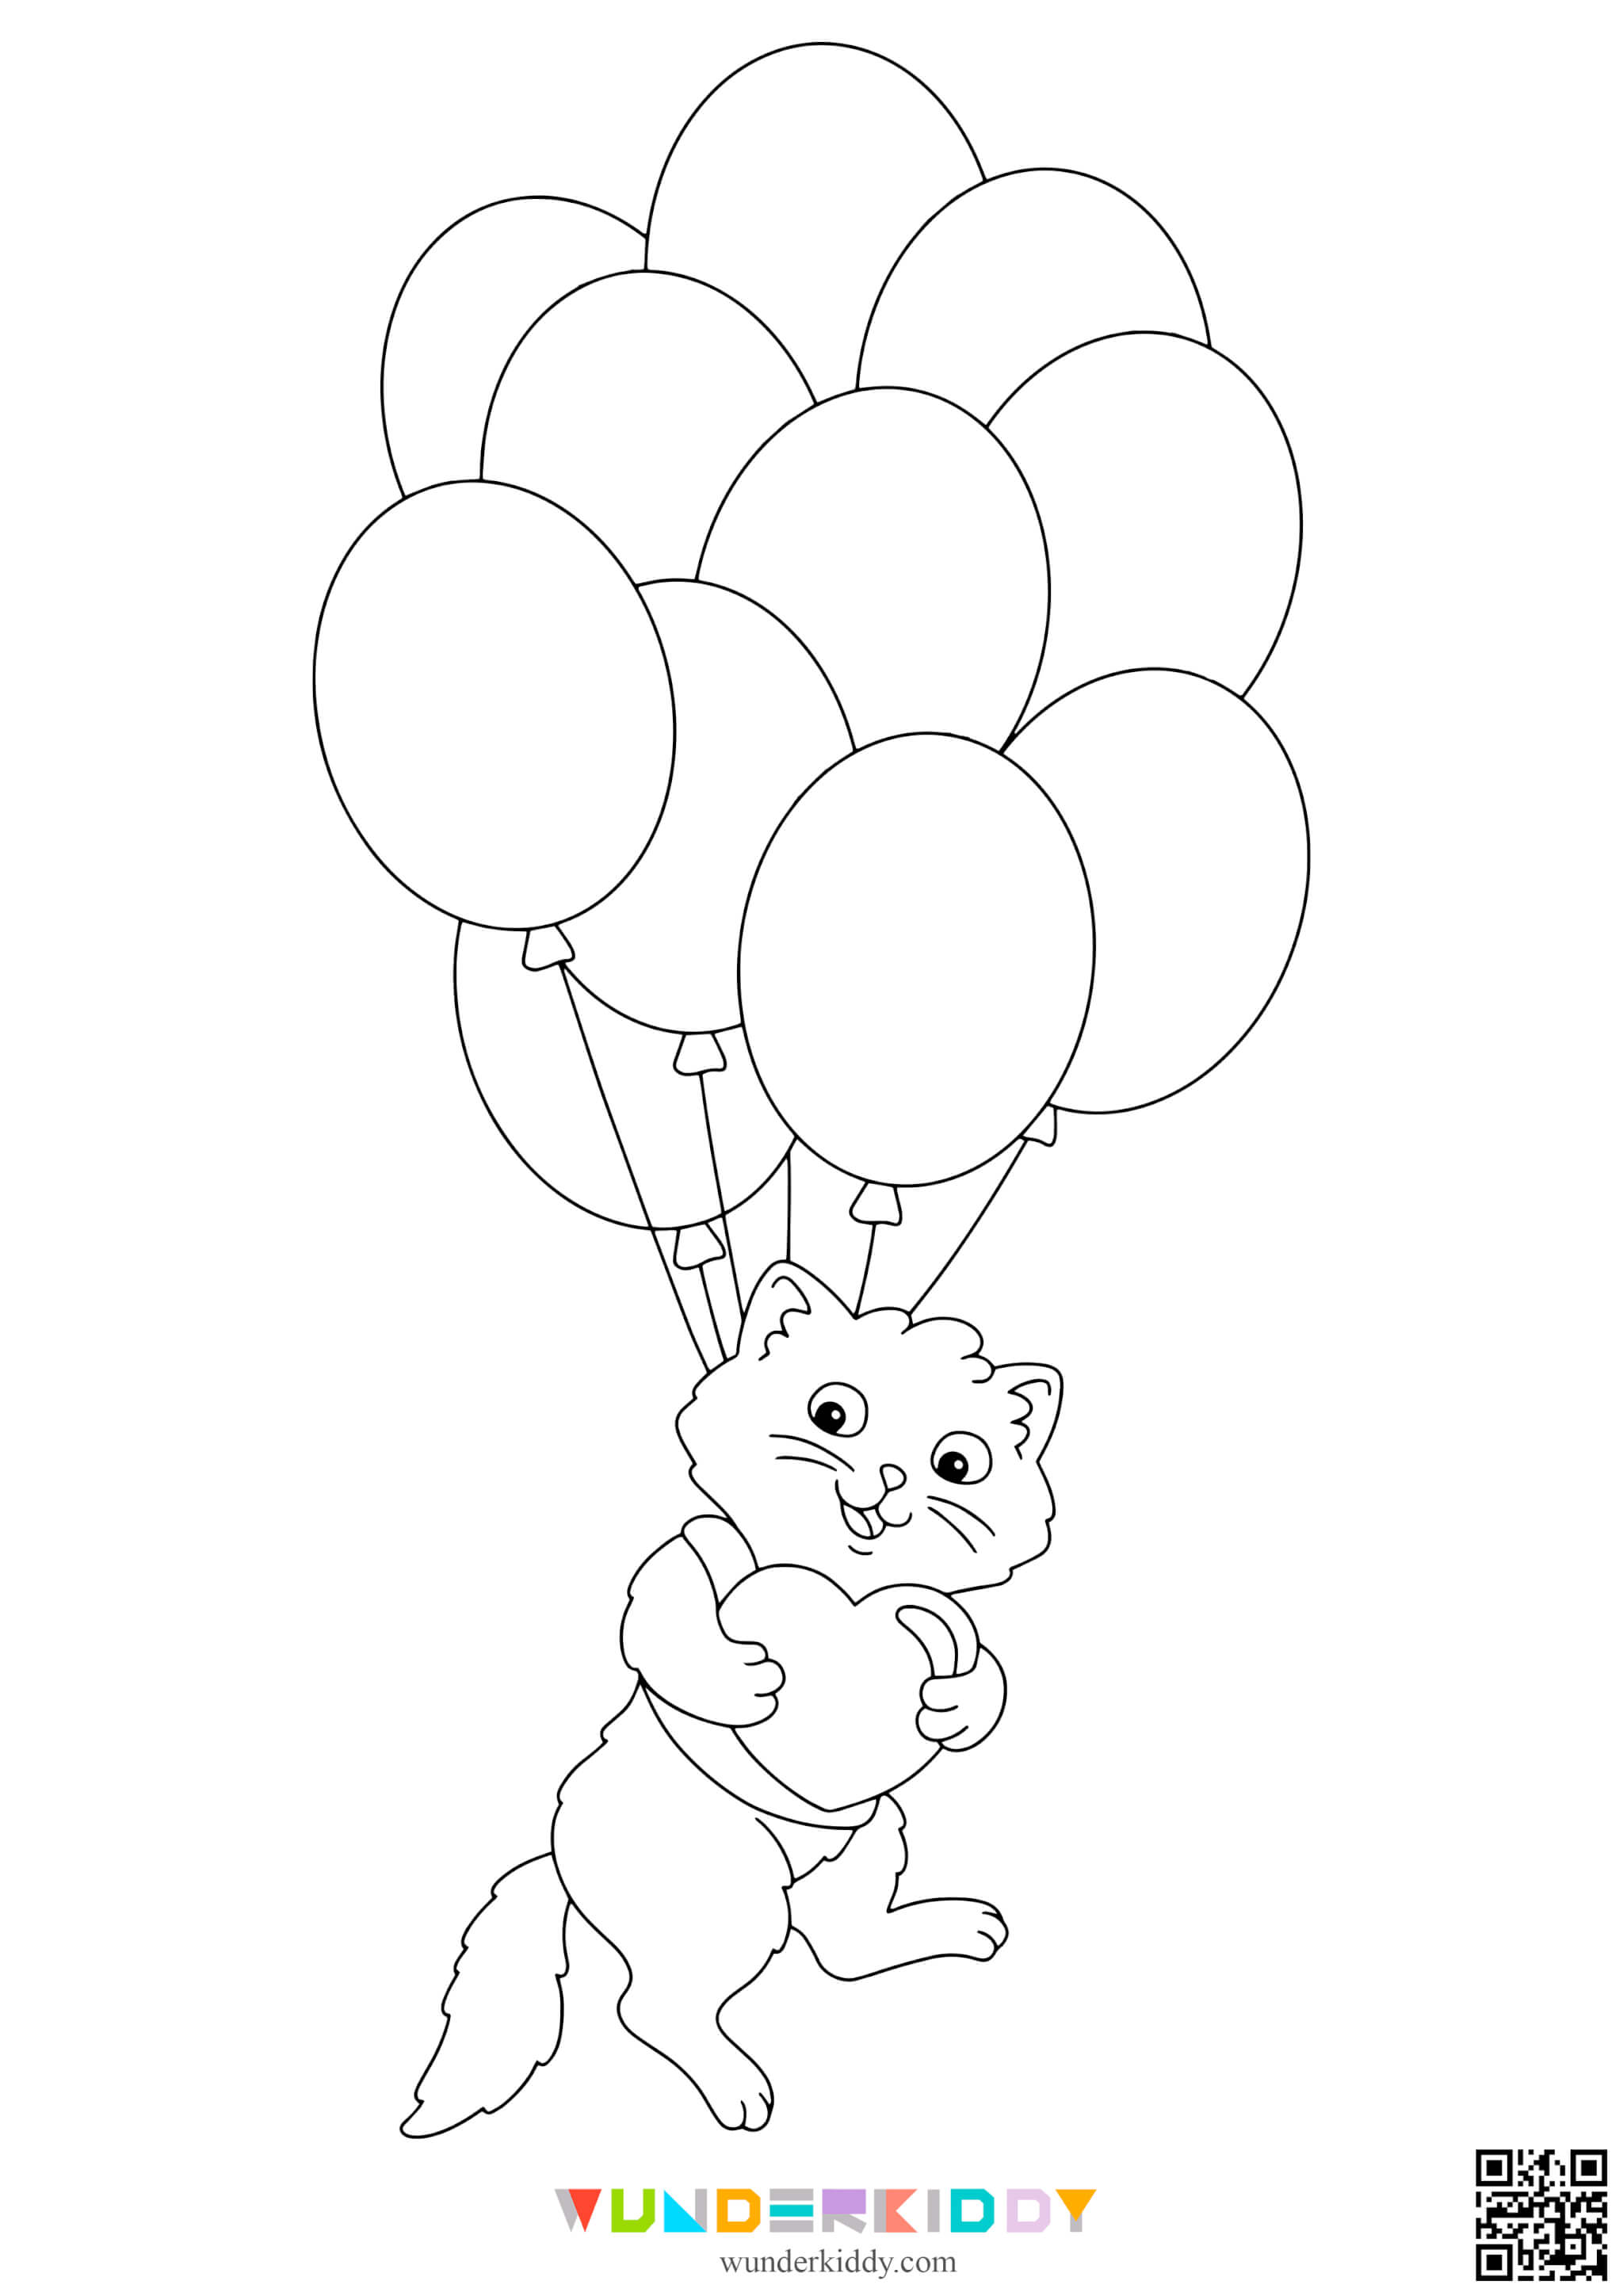 Valentines Coloring Pages - Image 3